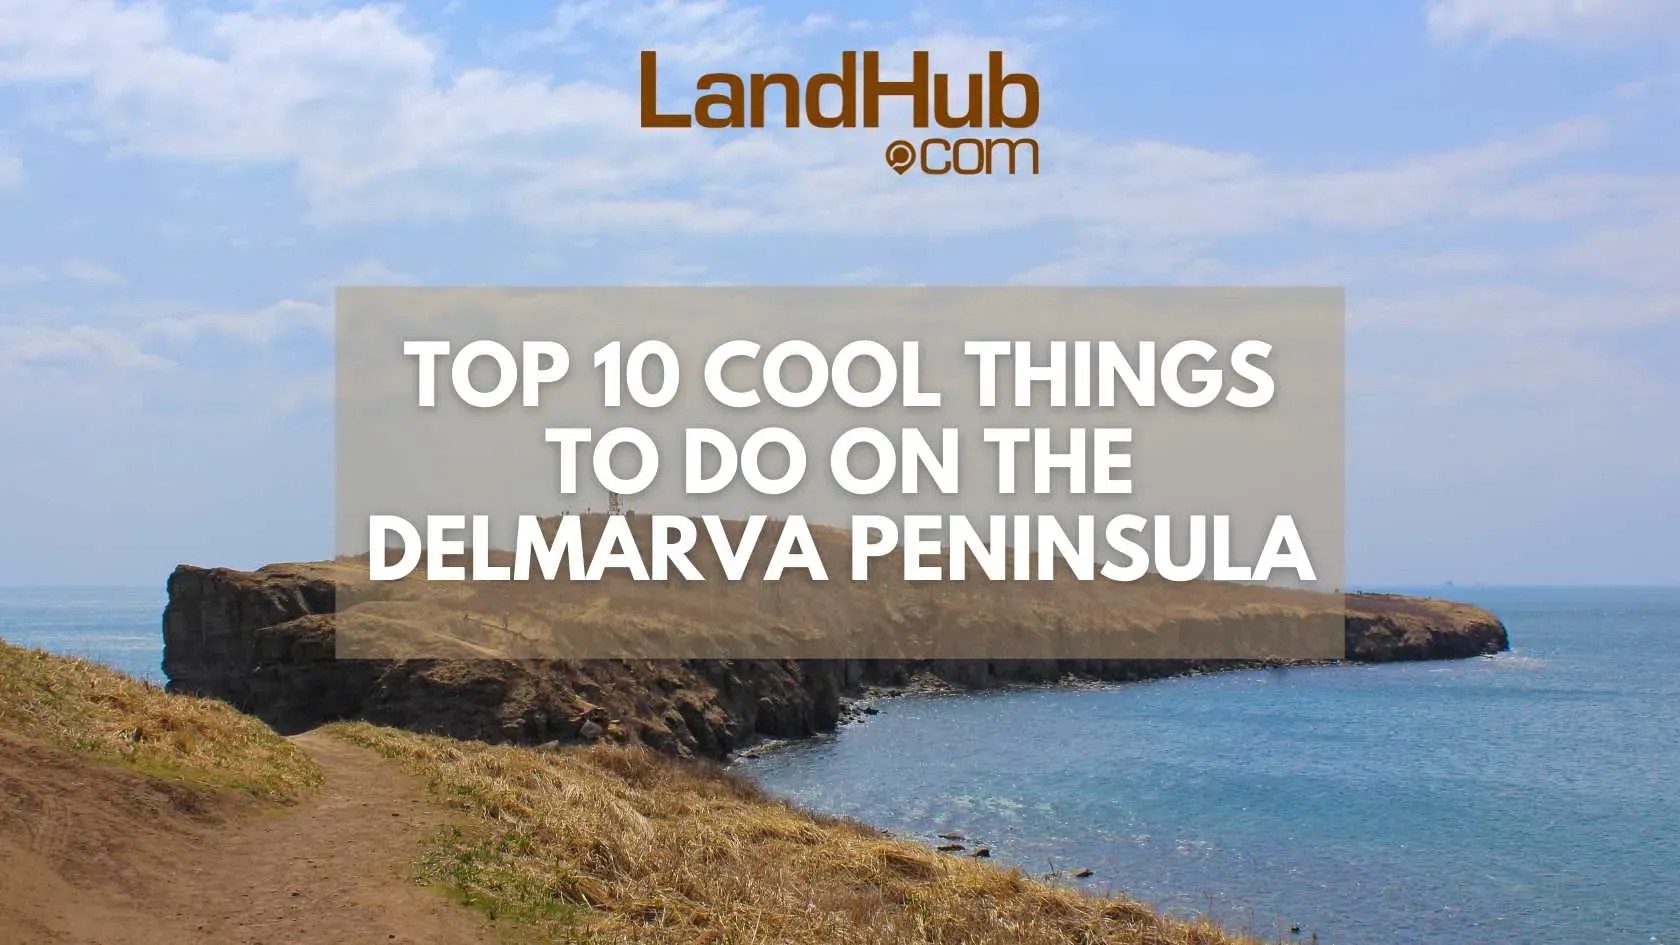 Top 10 Cool Things to Do on the Delmarva Peninsula